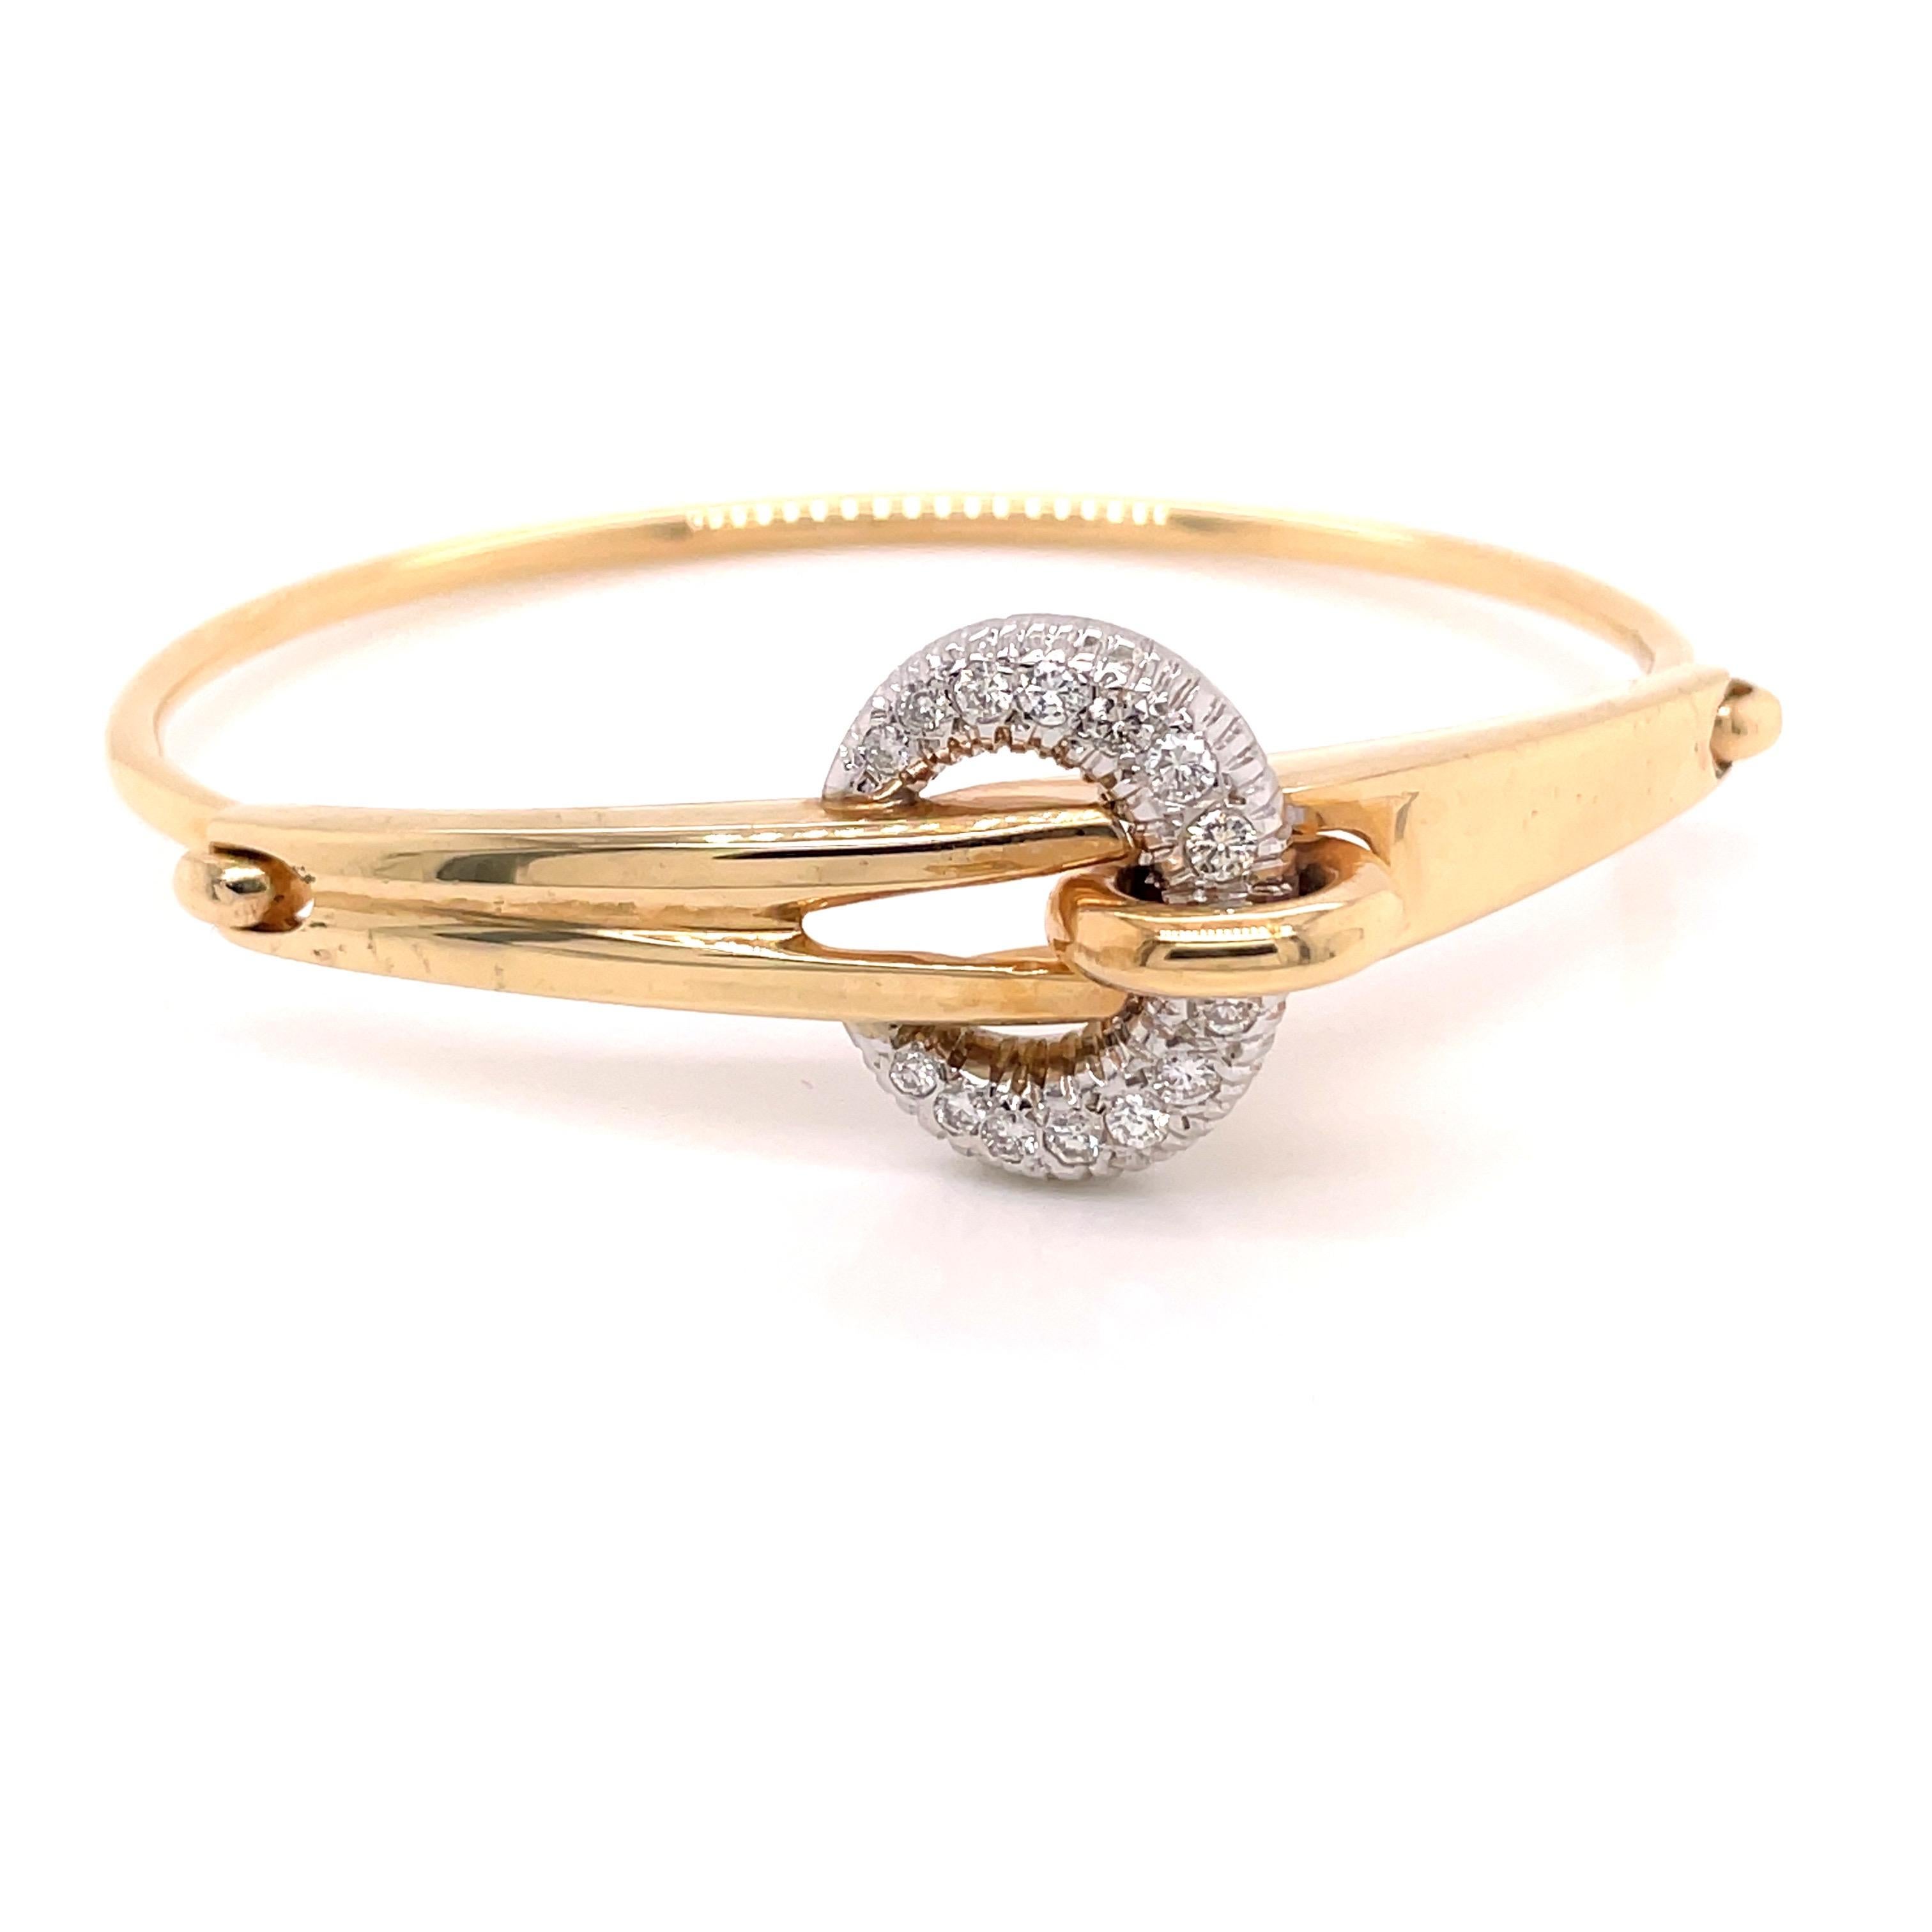 14K 2-Tone Gold Diamond Buckle Bangle Bracelet .63ct - The bangle is set with 14 round brilliant diamonds weighing .63ct with G - H color and SI clarity. The width of the buckle is 19mm. The bangle tapers from 7mm on top to 2.3mm on the bottom. The